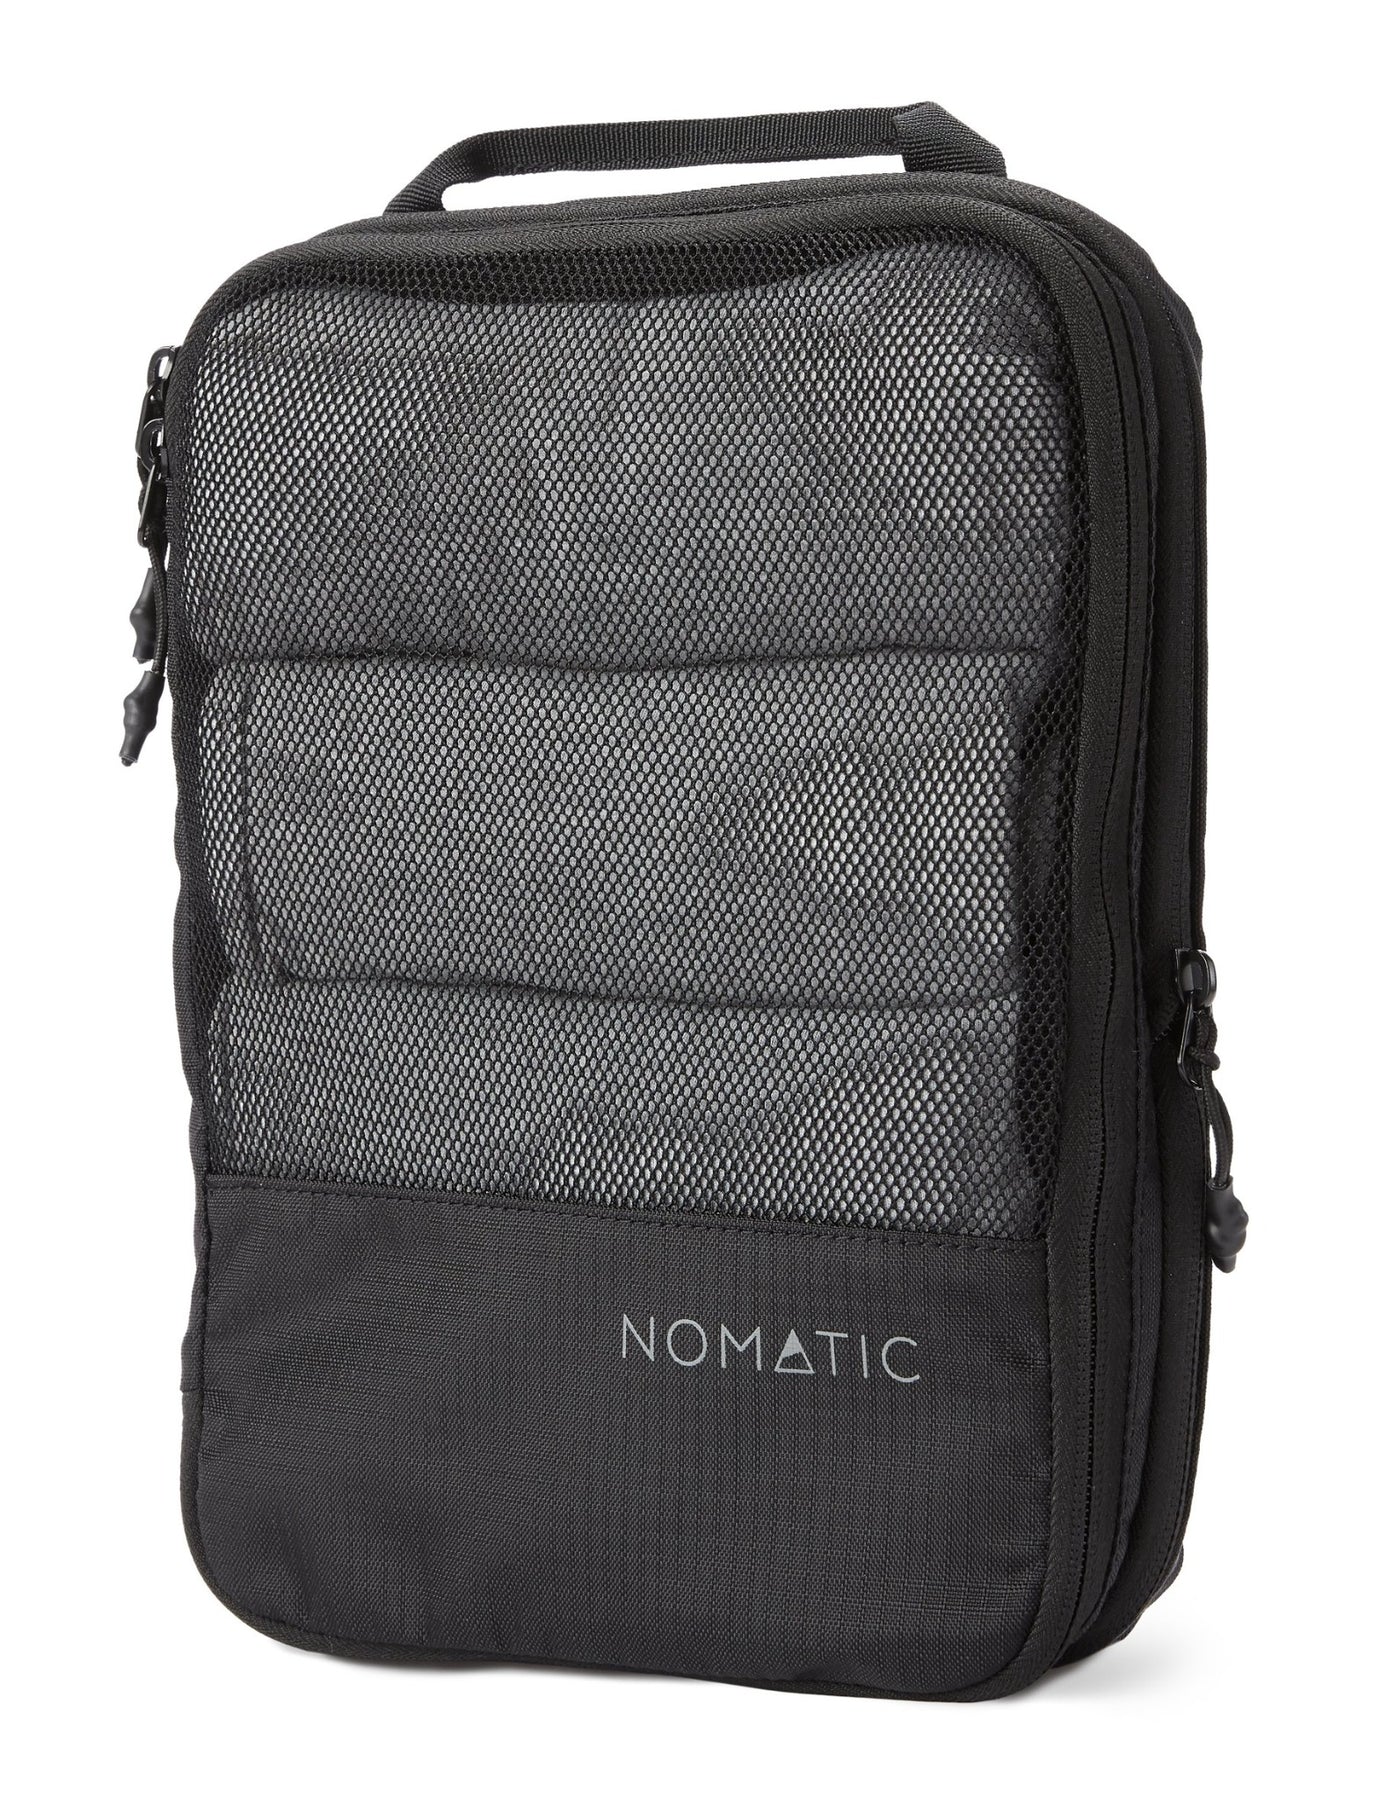 https://cdn.shopify.com/s/files/1/0268/1133/4741/products/Nomatic_PackingCube_Med_AngleFront_20190702_1800x1800.jpg?v=1591727735